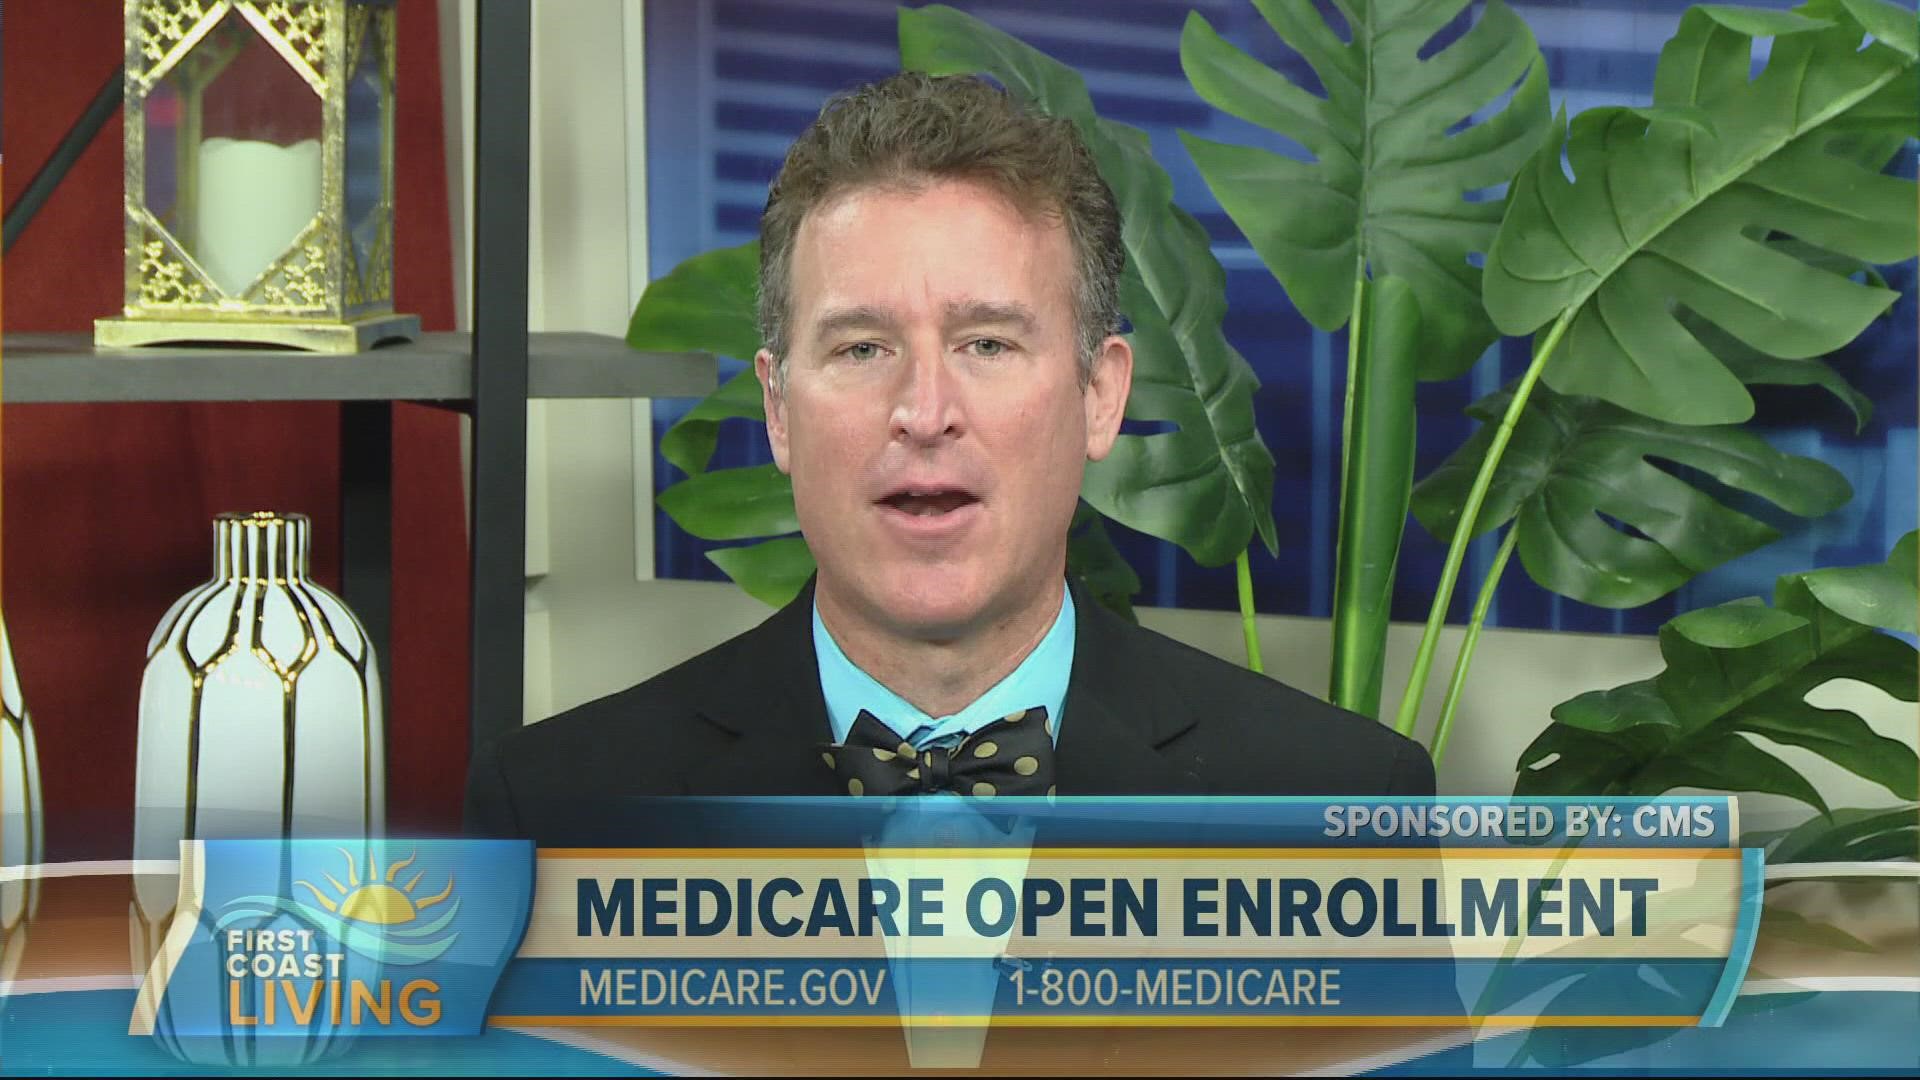 Director for The Centers for Medicare & Medicaid Services, Dr. Meena Seshamani shares the importance of comparing plans during open enrollment.